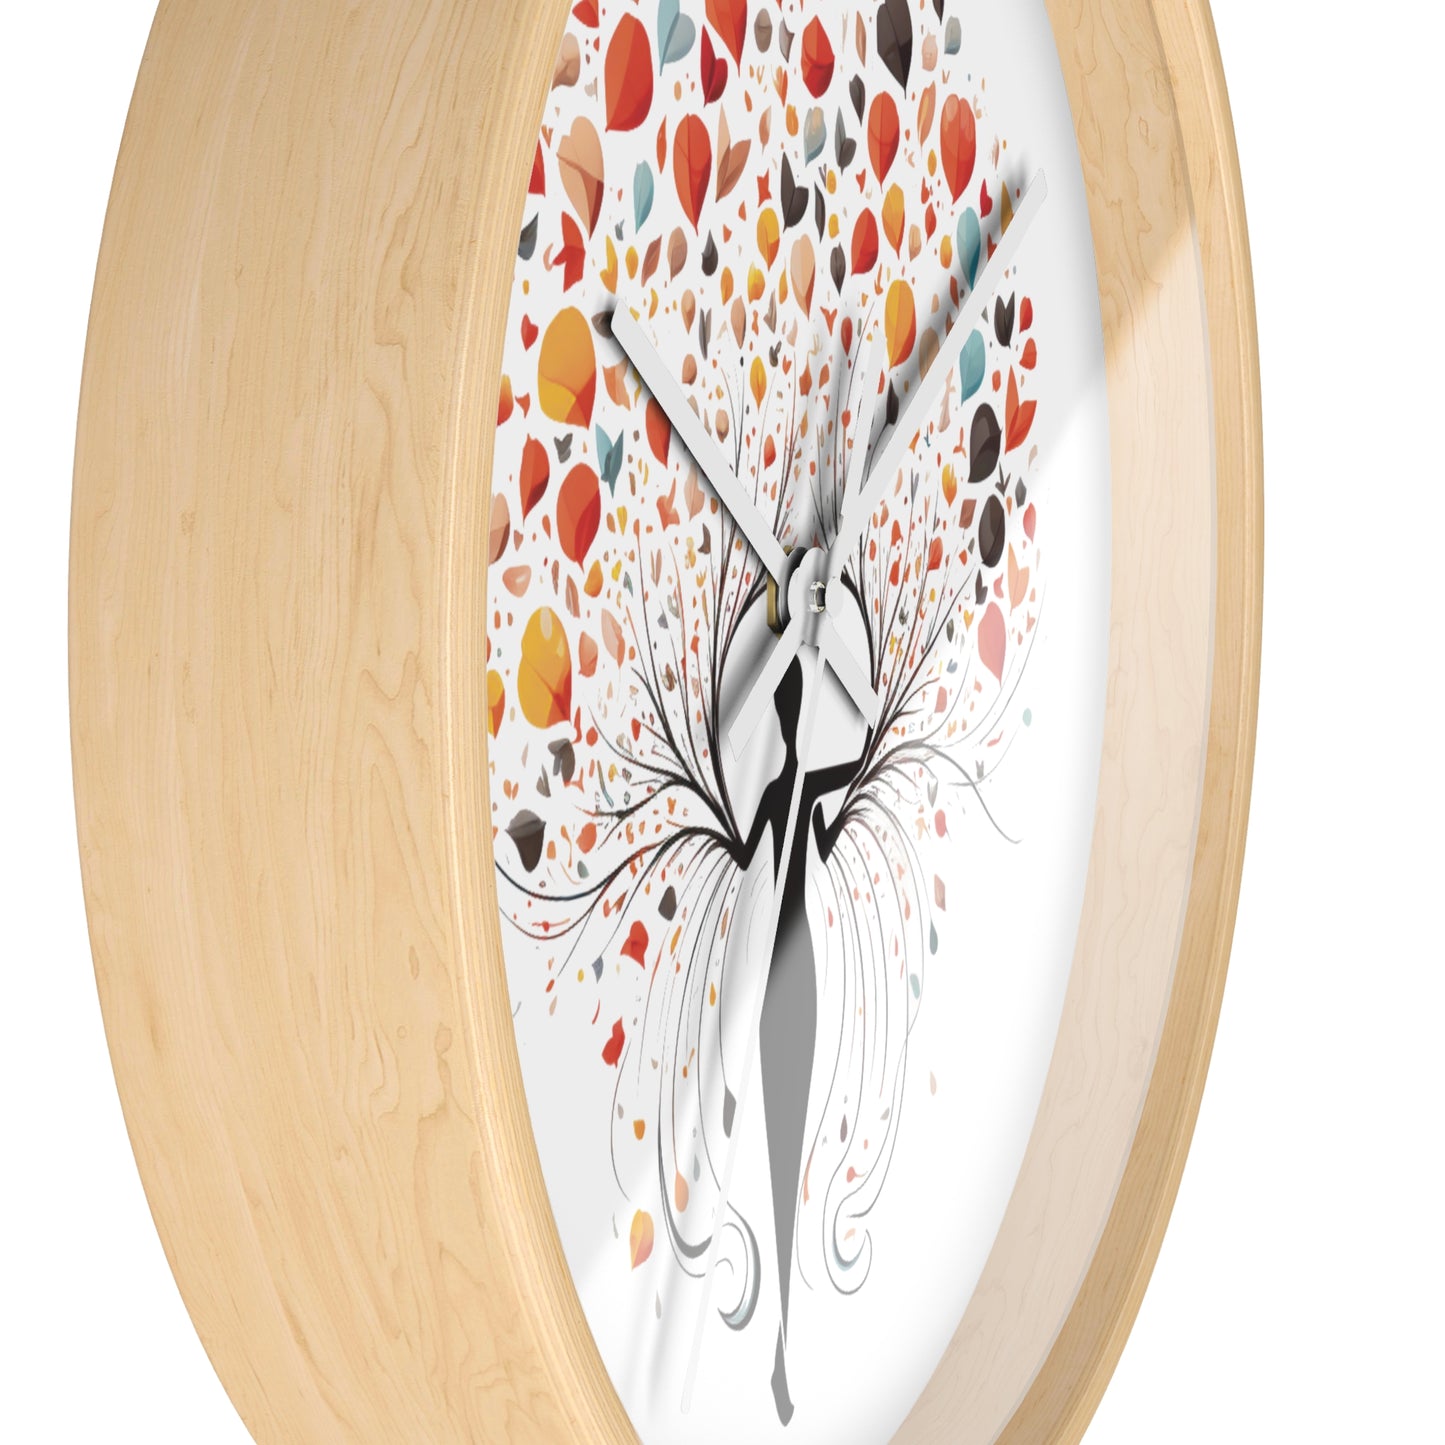 Mindful Living Mindful Giving Wall Clock